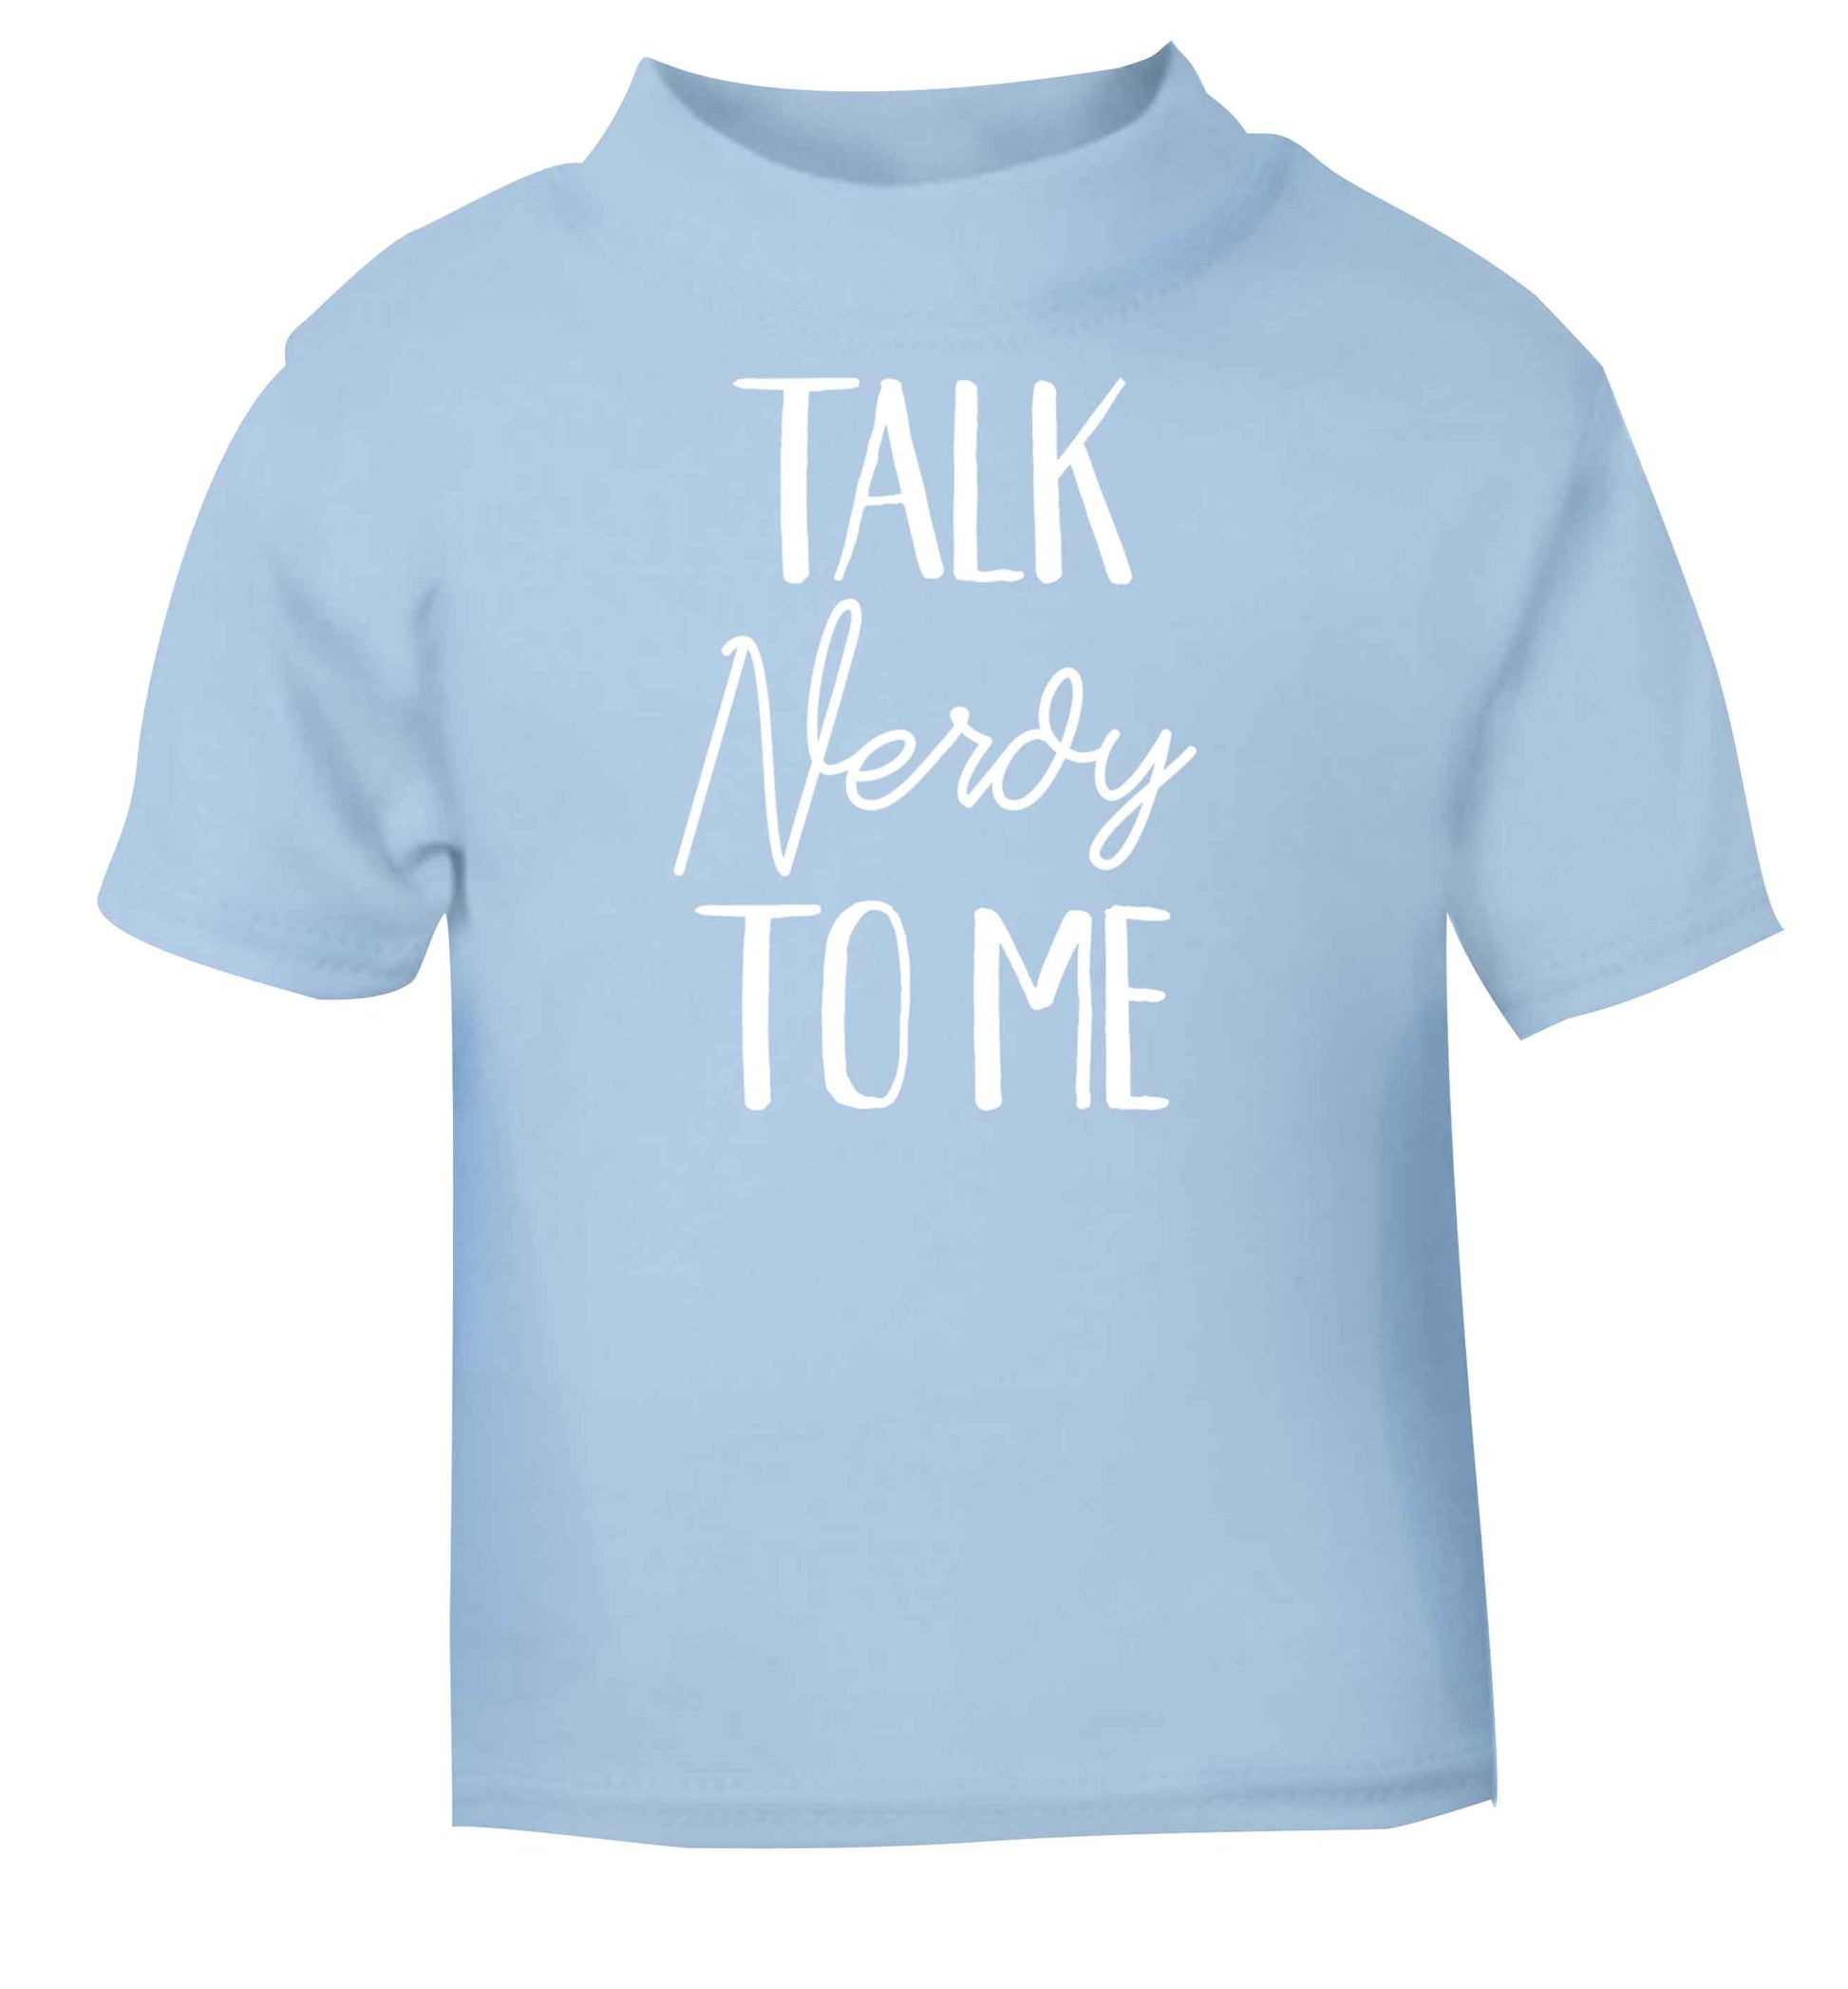 Talk nerdy to me light blue baby toddler Tshirt 2 Years